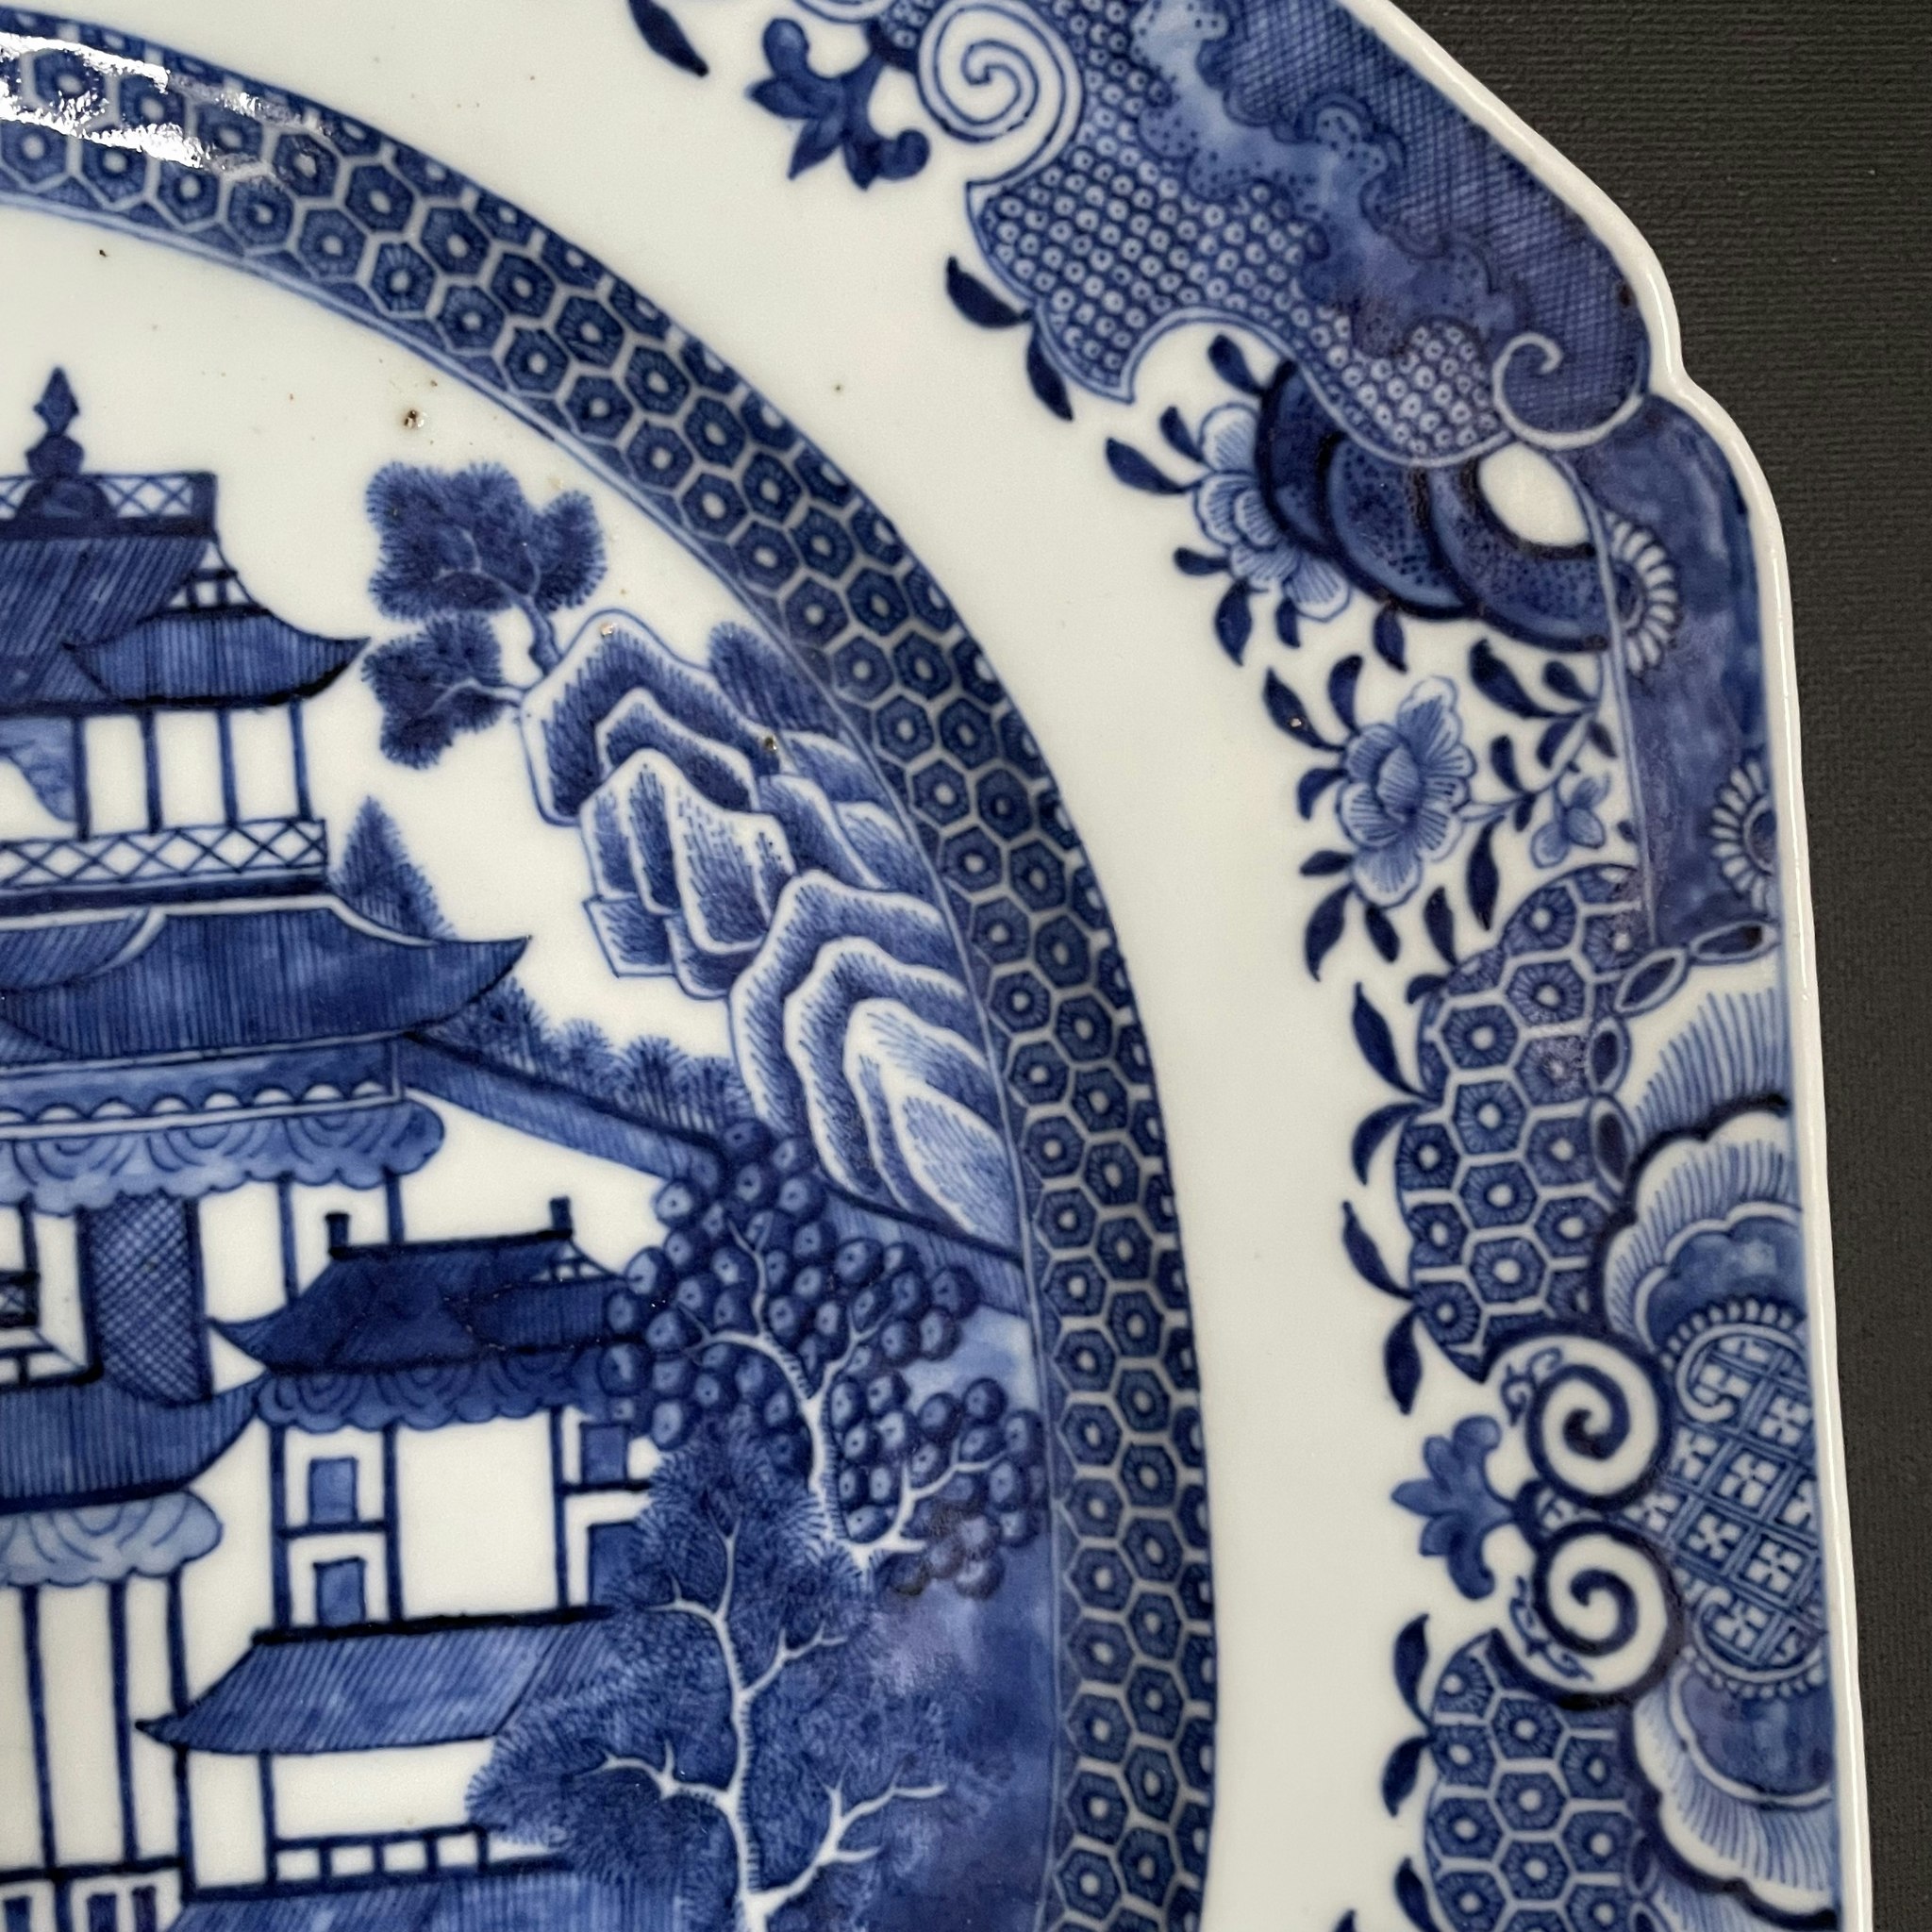 Antique Chinese Export Blue and White Porcelain platter, Qianlong period #835